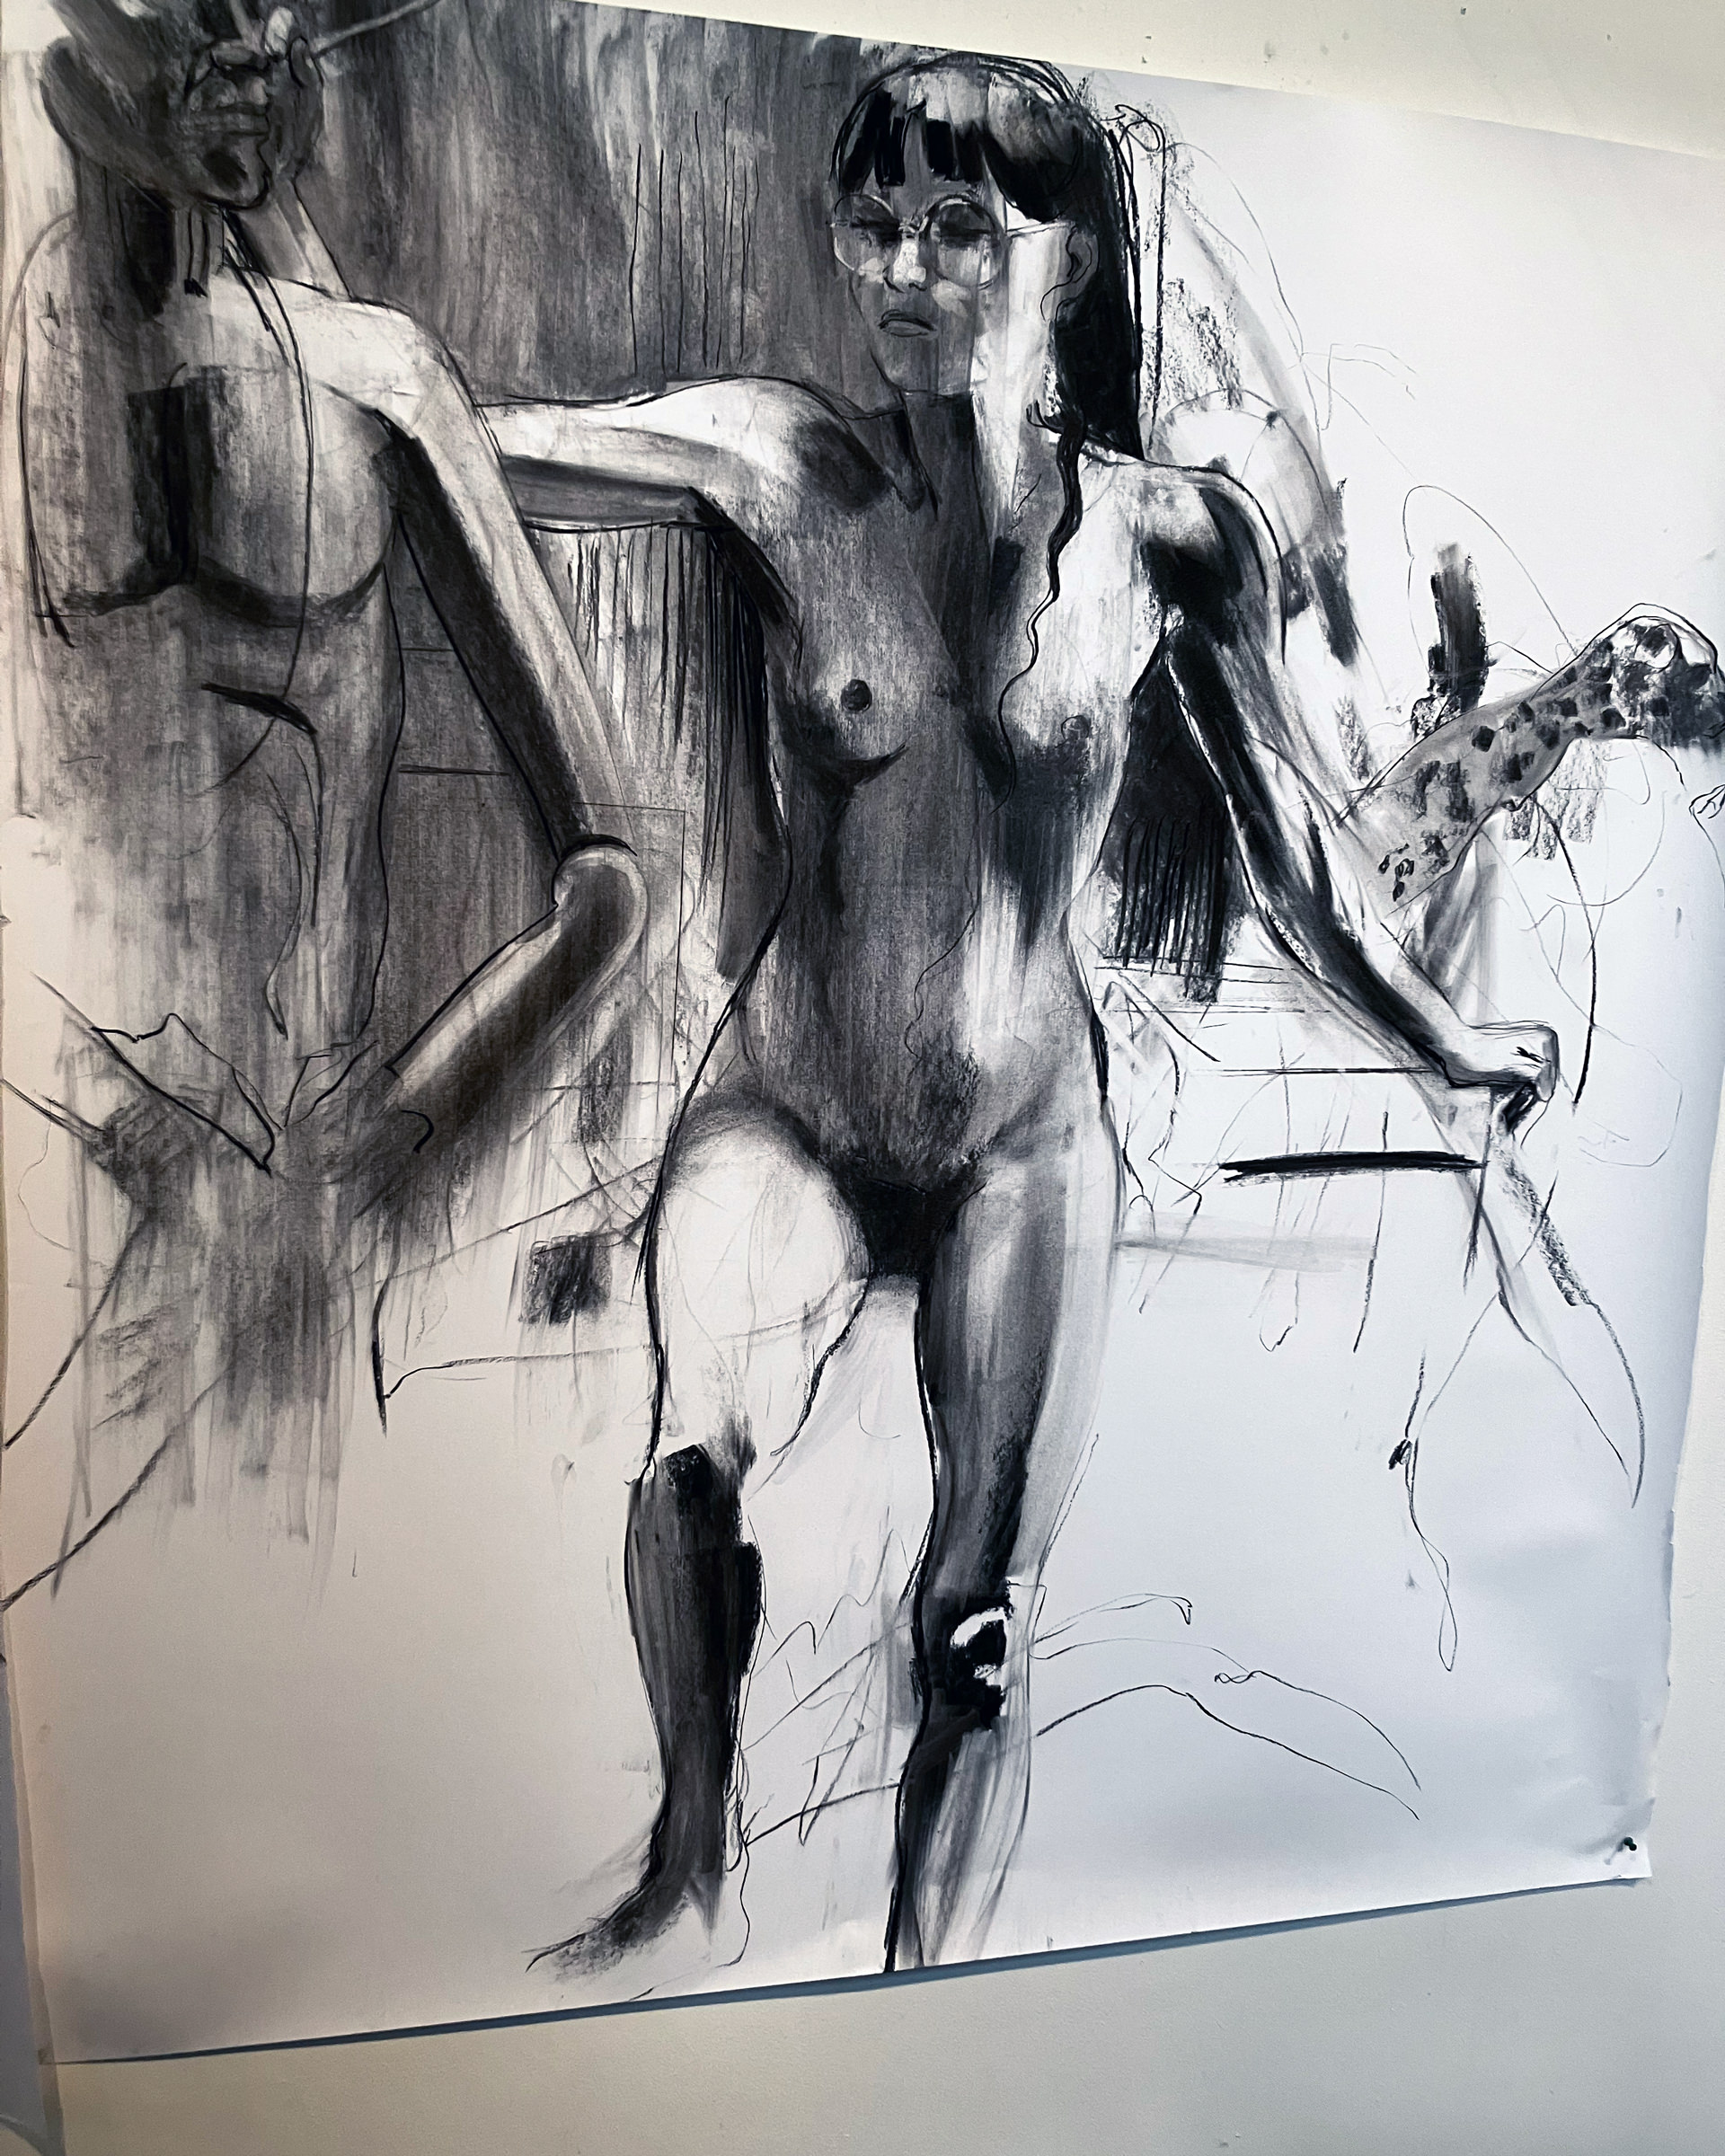 Charcoal drawing, anatomy and abstract study